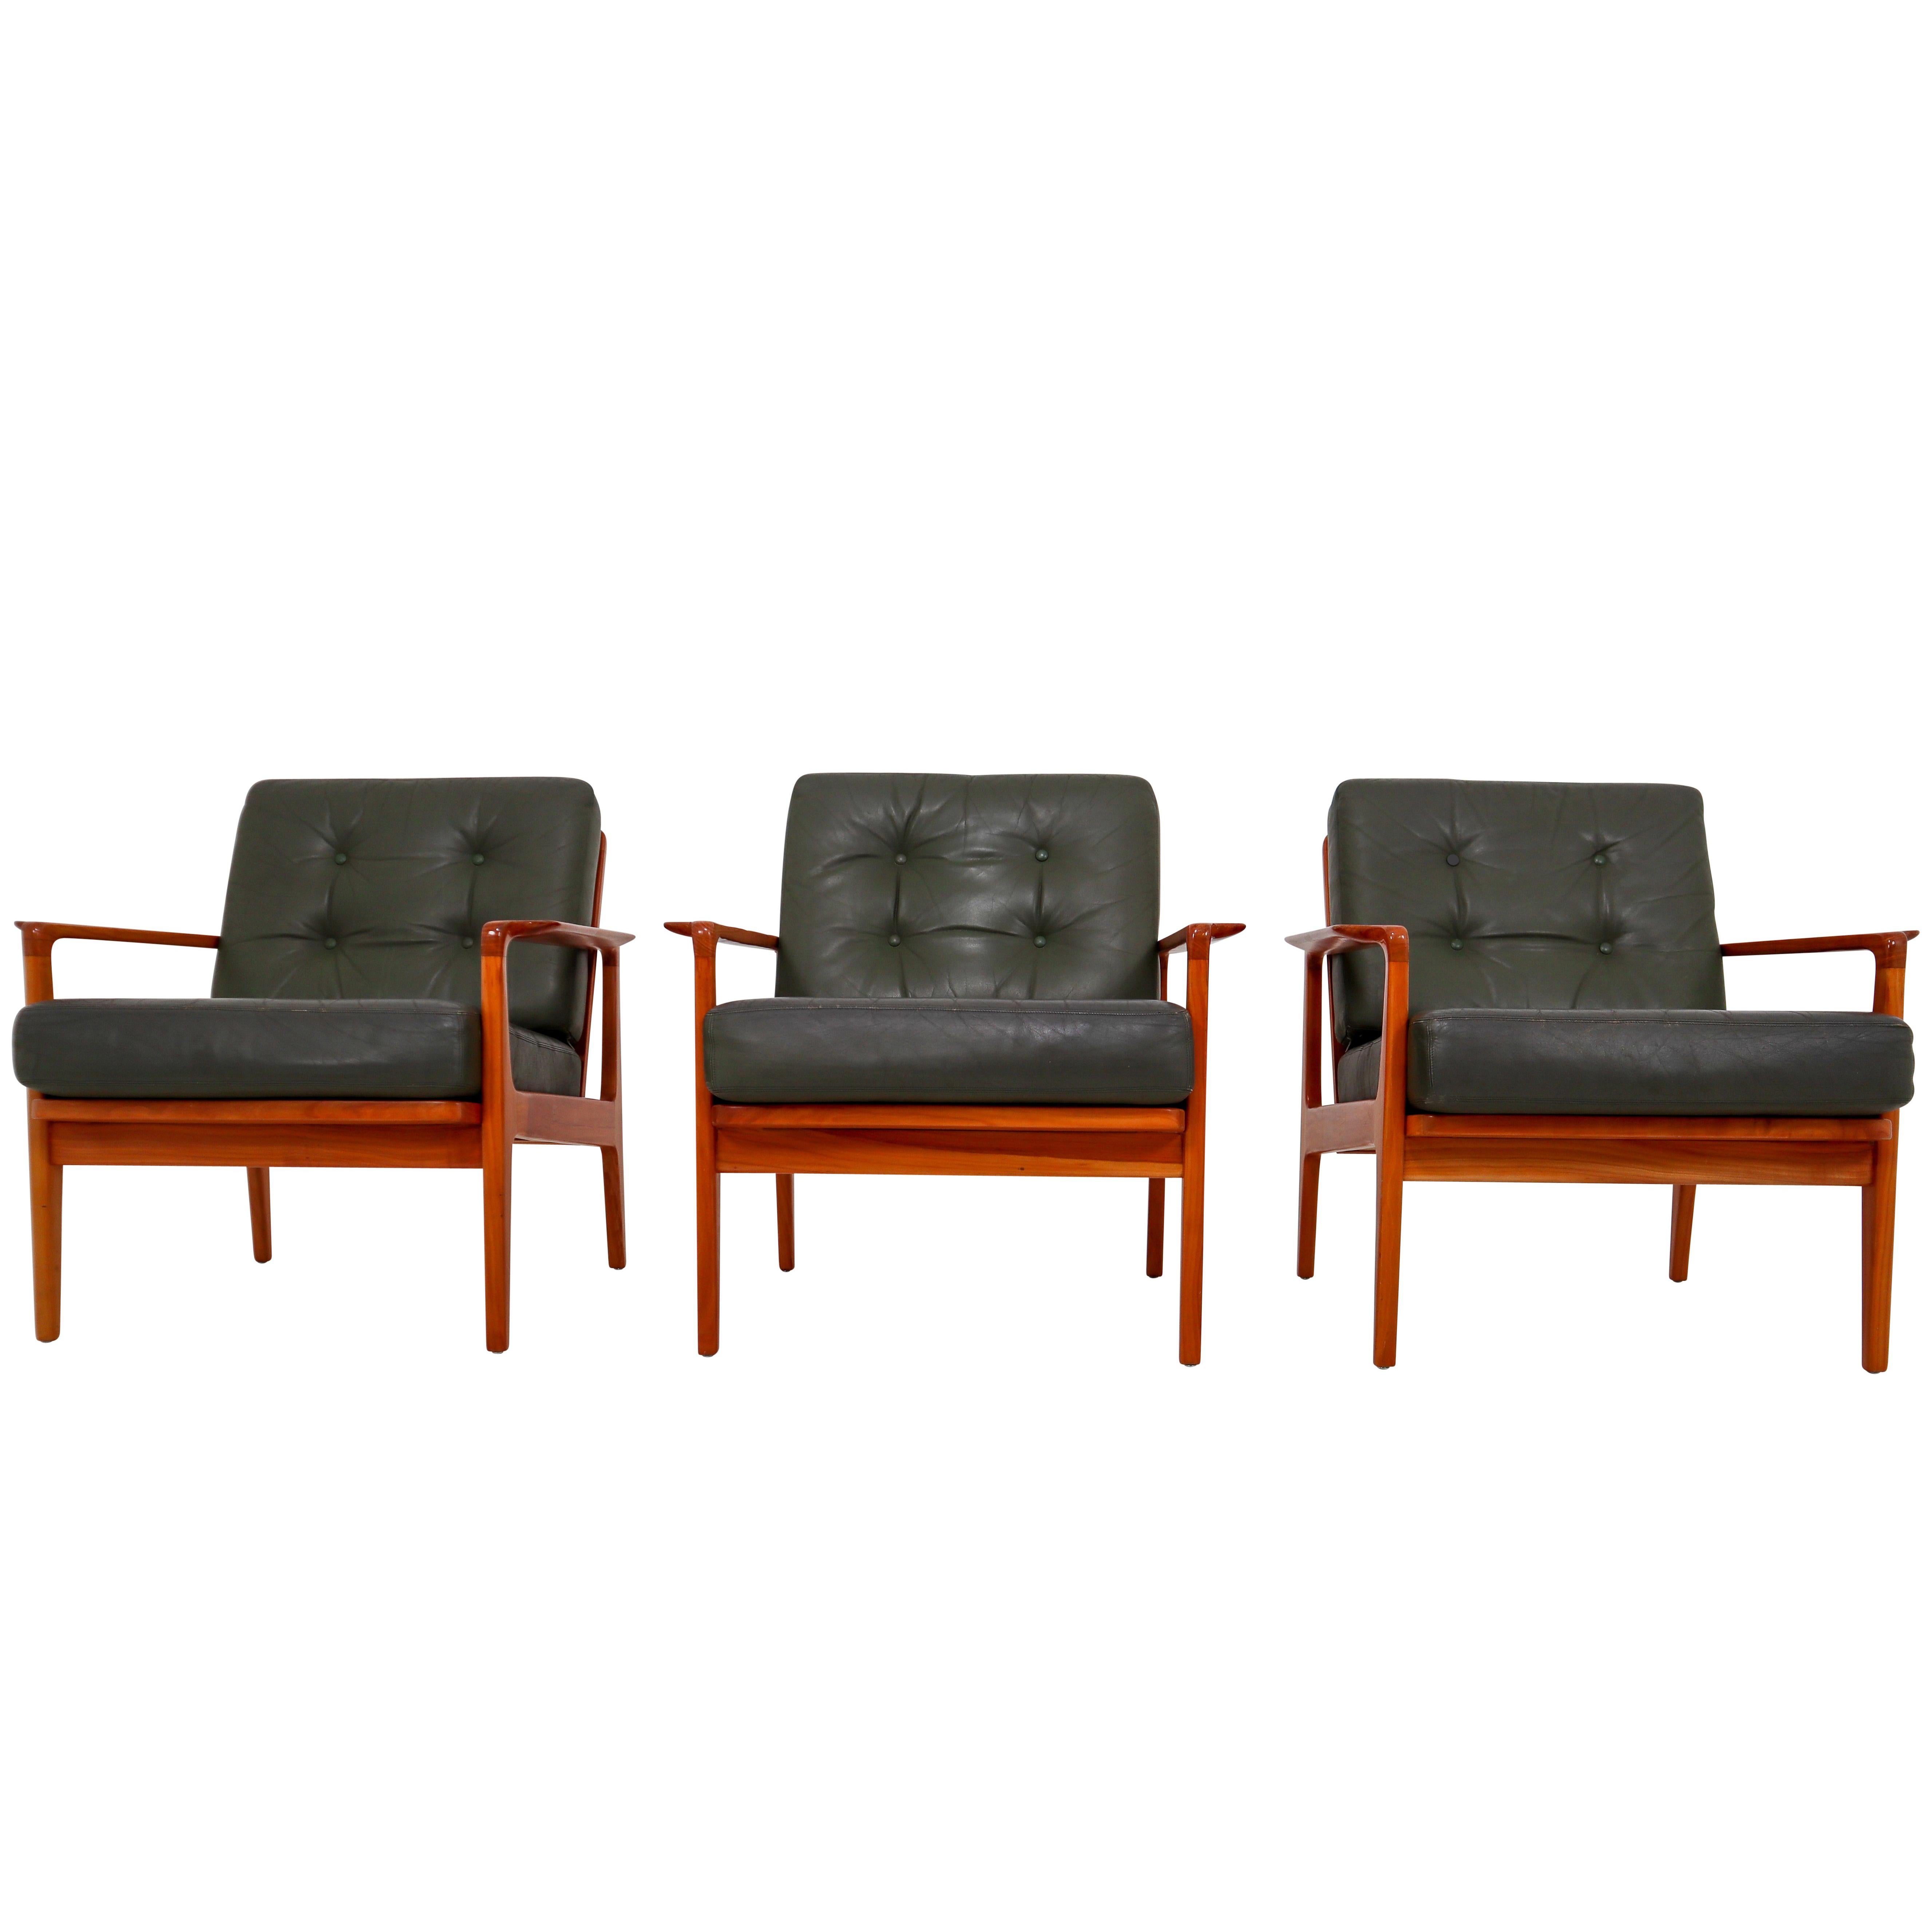 Midcentury Danish Lounge Chairs by Arne Wahl Iversen in Green Leather, 1960s